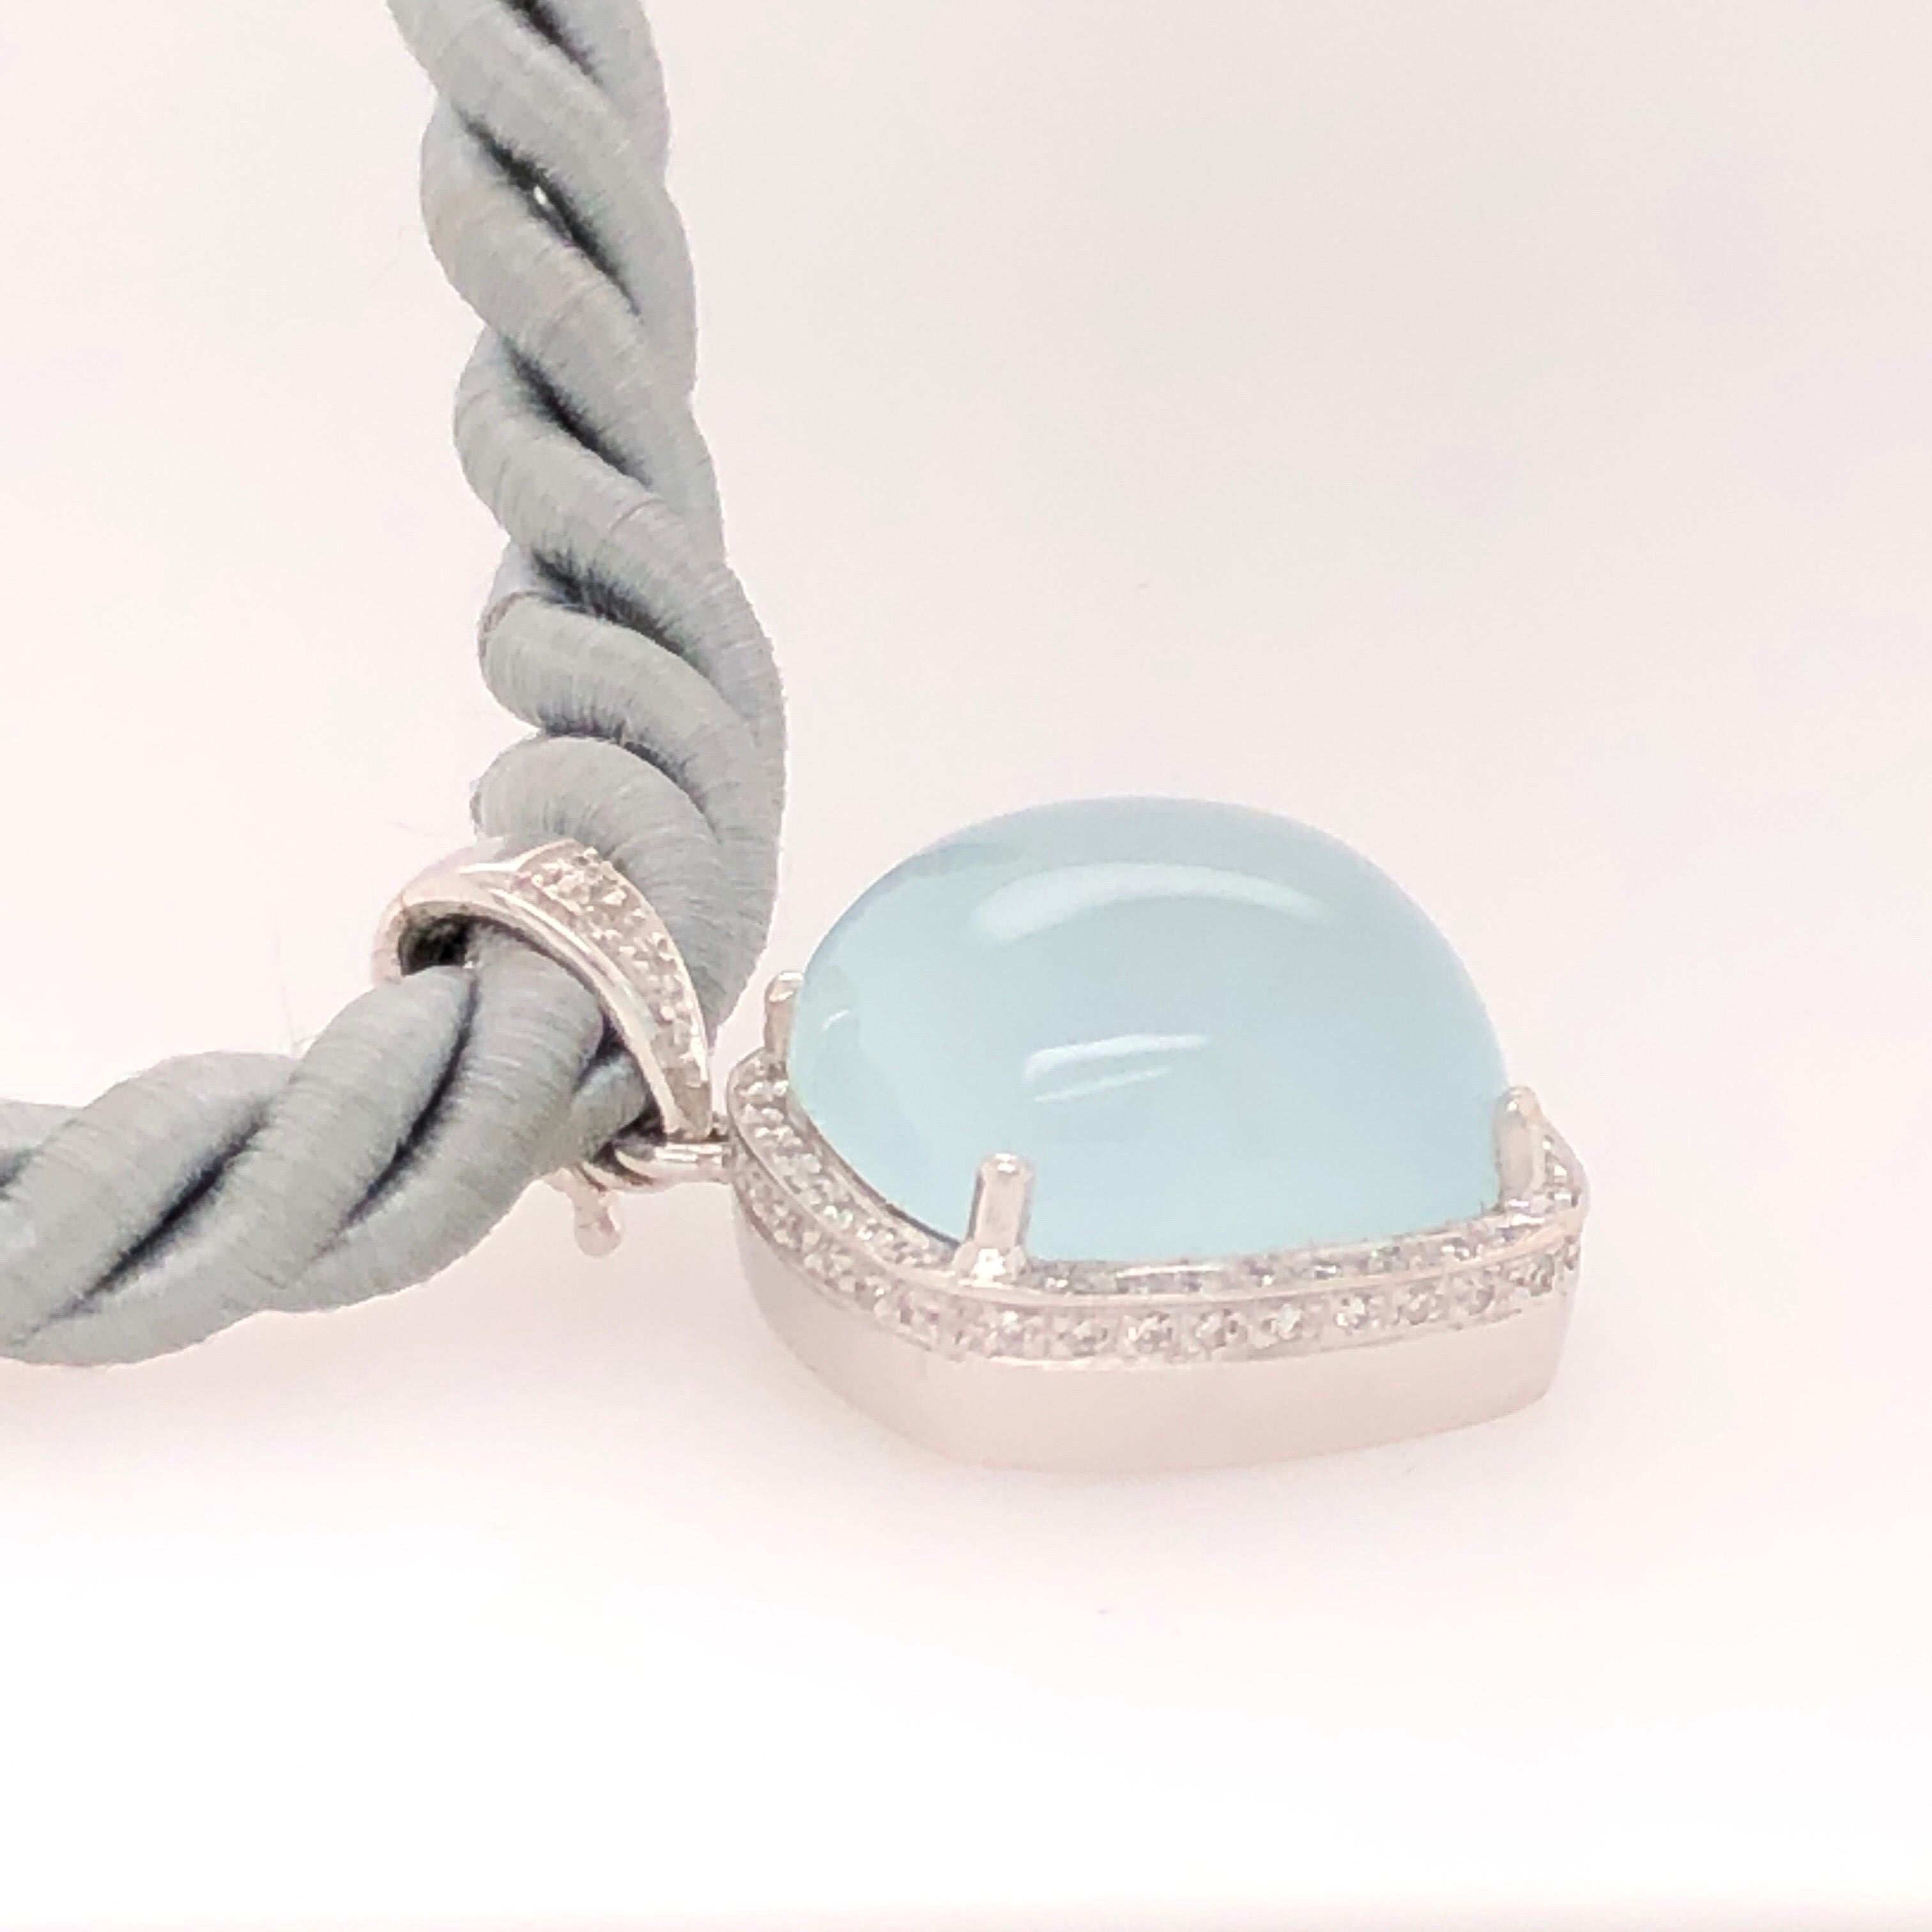 This luminescent aqua chalcedony is set in to a 14K white gold pendant. A sparkle of 0.25 CTS of diamonds sit in a halo around the stone. 

Signed: Rina Limor 

From the Skibell Estate Collection